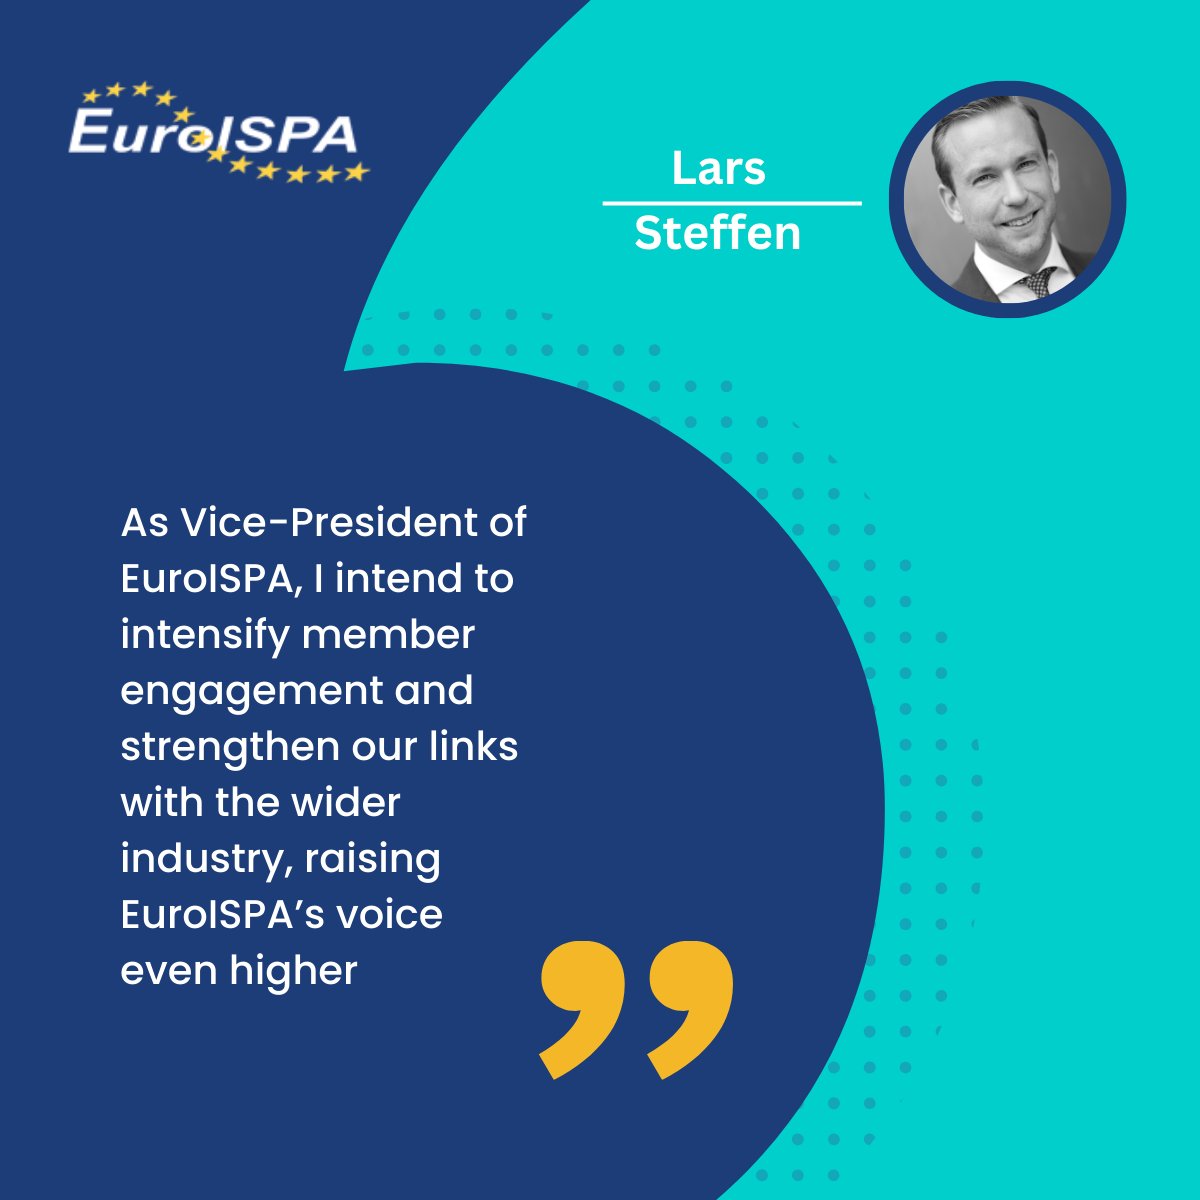 Get to know our new Vice-President Lars Steffen: 🎙️'Several current issues in the European Internet landscape are increasingly being handled at infrastructure level, placing EuroISPA in a favorable position to share the experience and expertise of its members to EU discussions'.